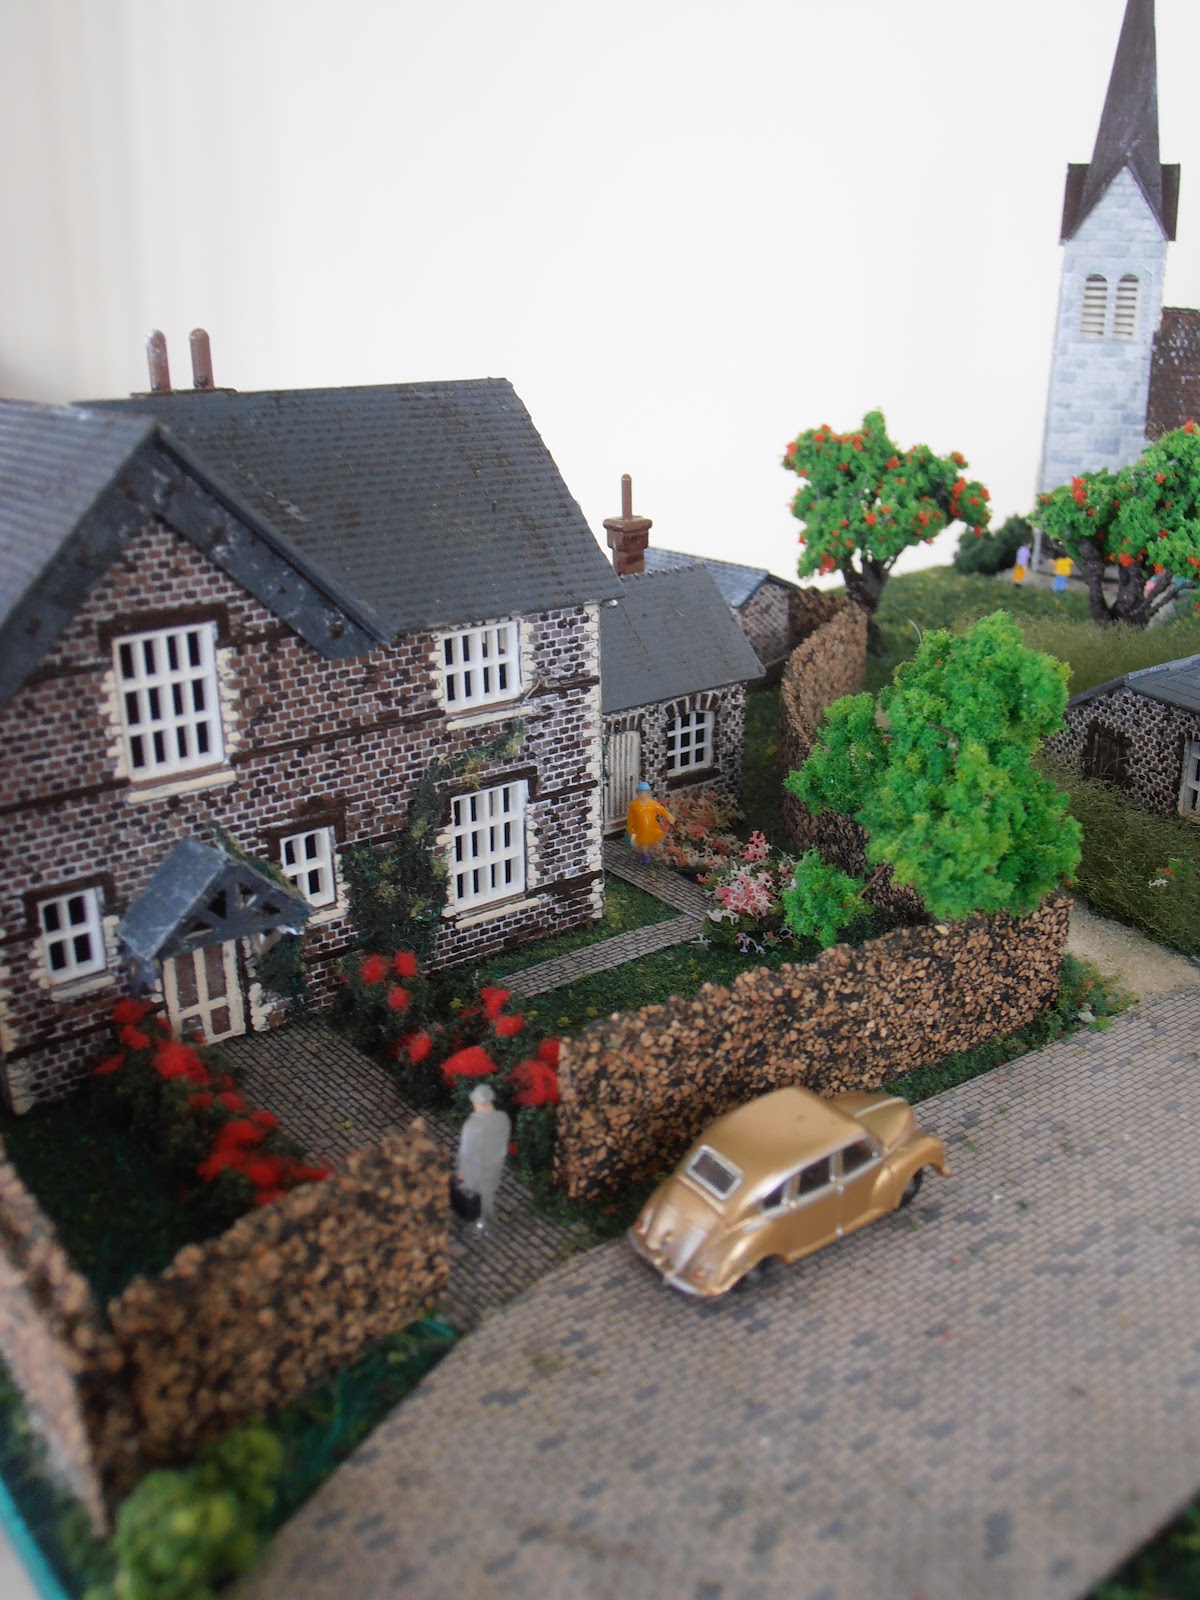 dolls houses and minis: The Miniature Village Layout ...